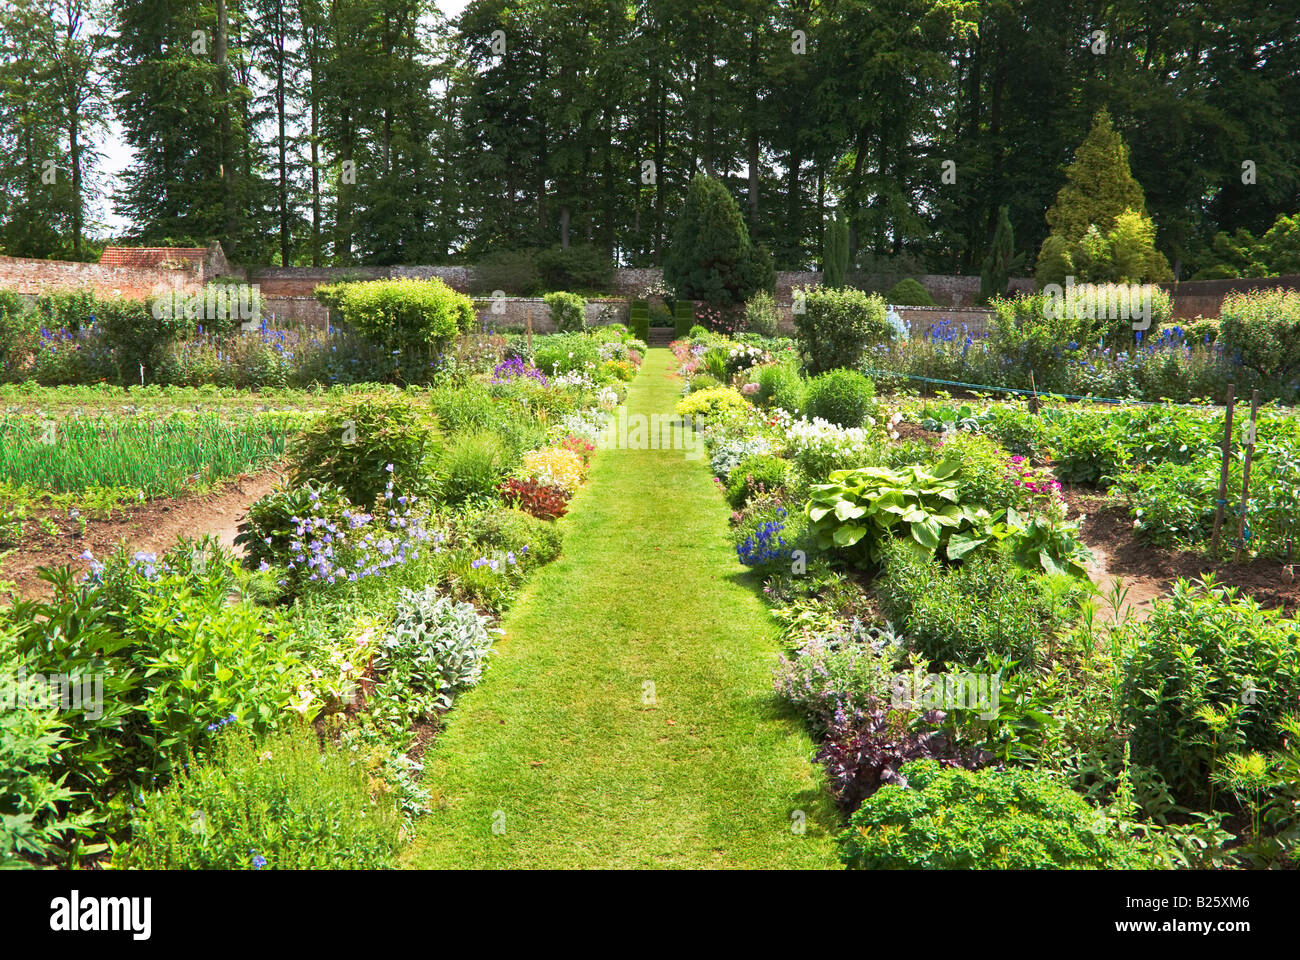 The potager inside a garden at the Chateau Miromesnil in Normandy France EU Stock Photo